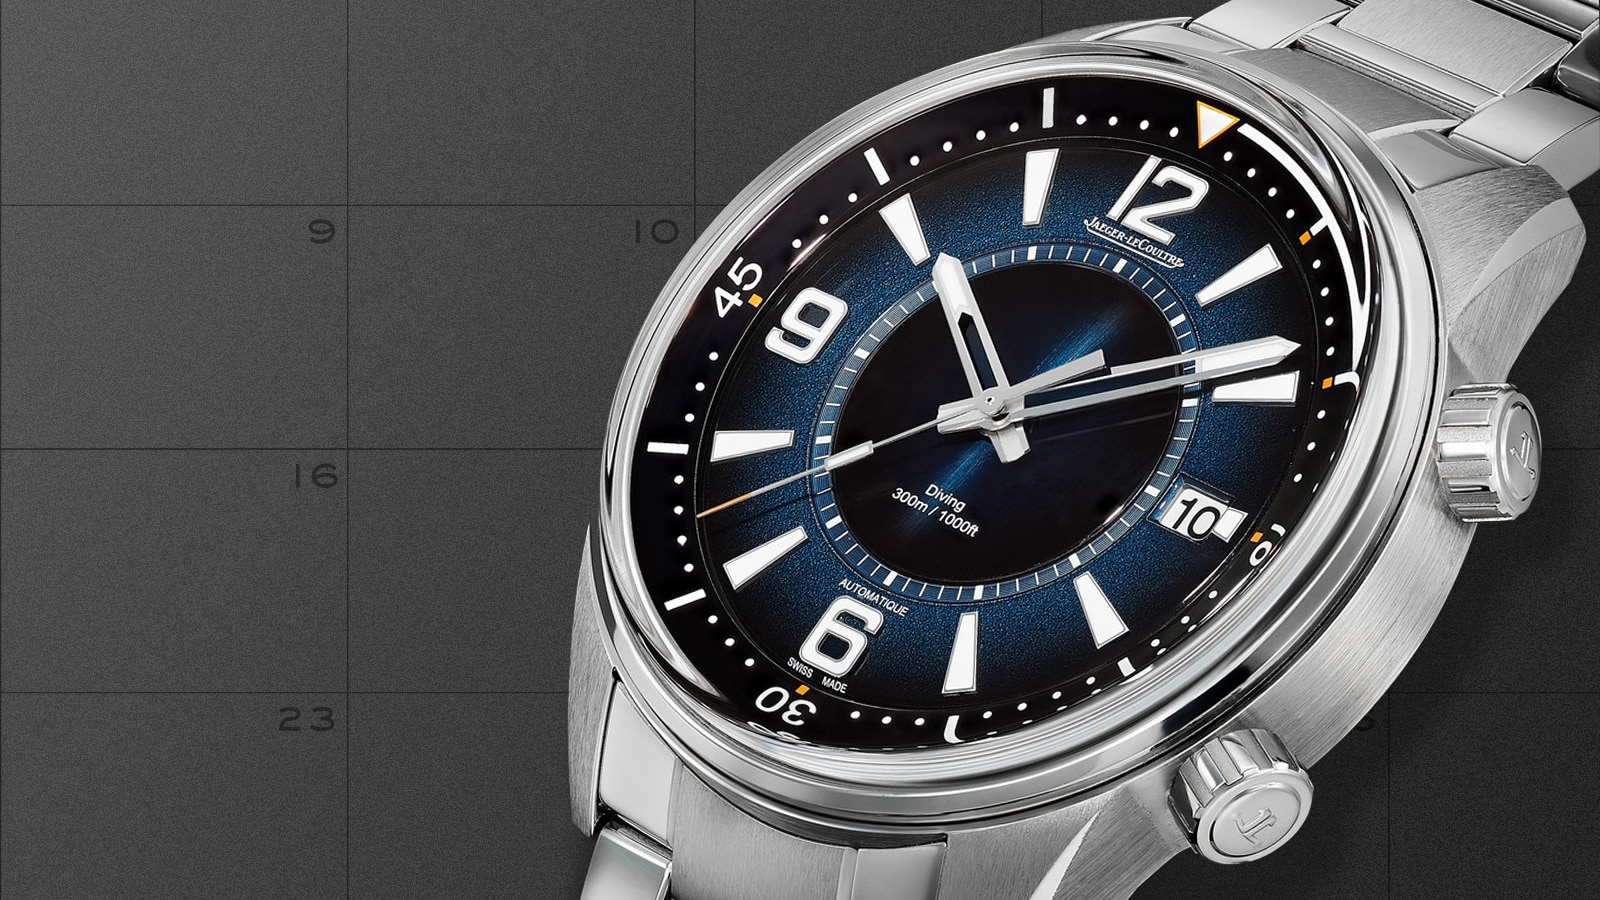 Watch Of The Week: Jaeger-LeCoultre Polaris Mariner Date | The Journal ...